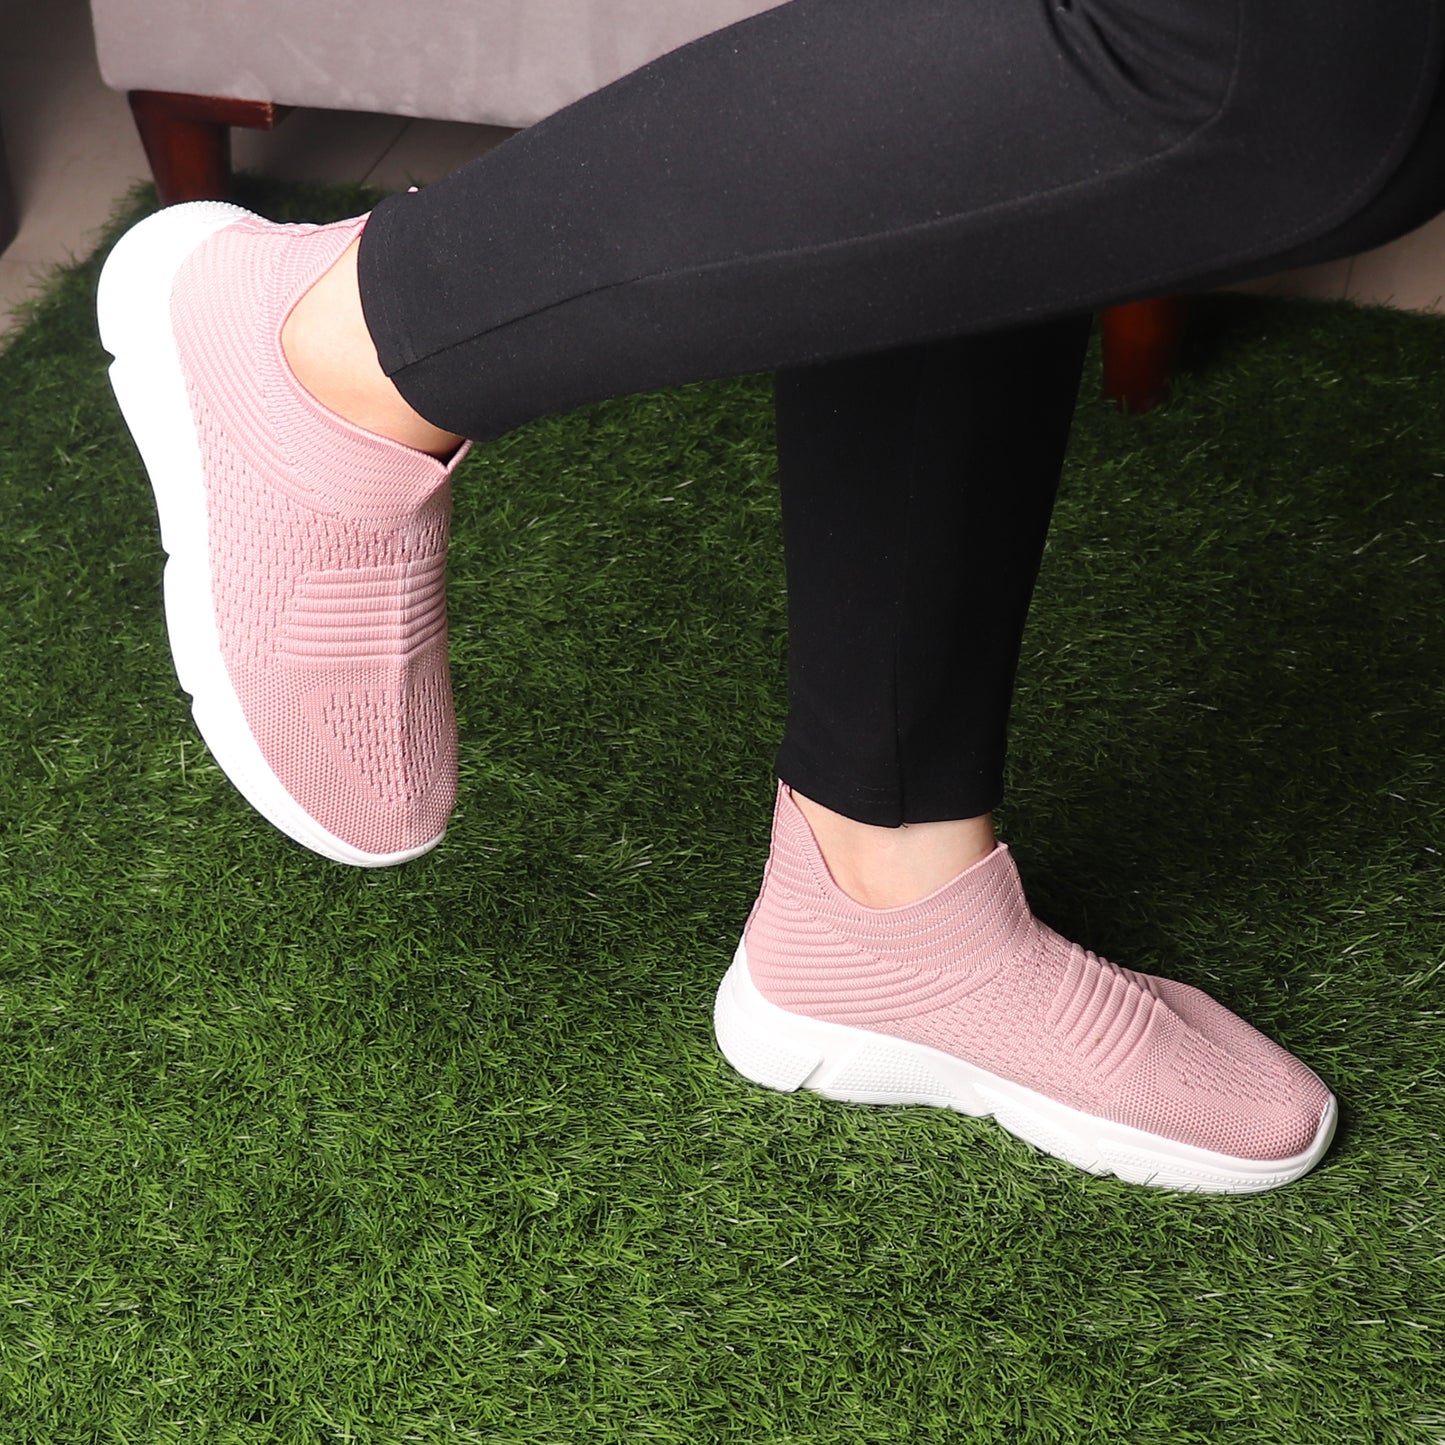 Foot Wear,The Cozy Gliders in Pink - Cippele Multi Store